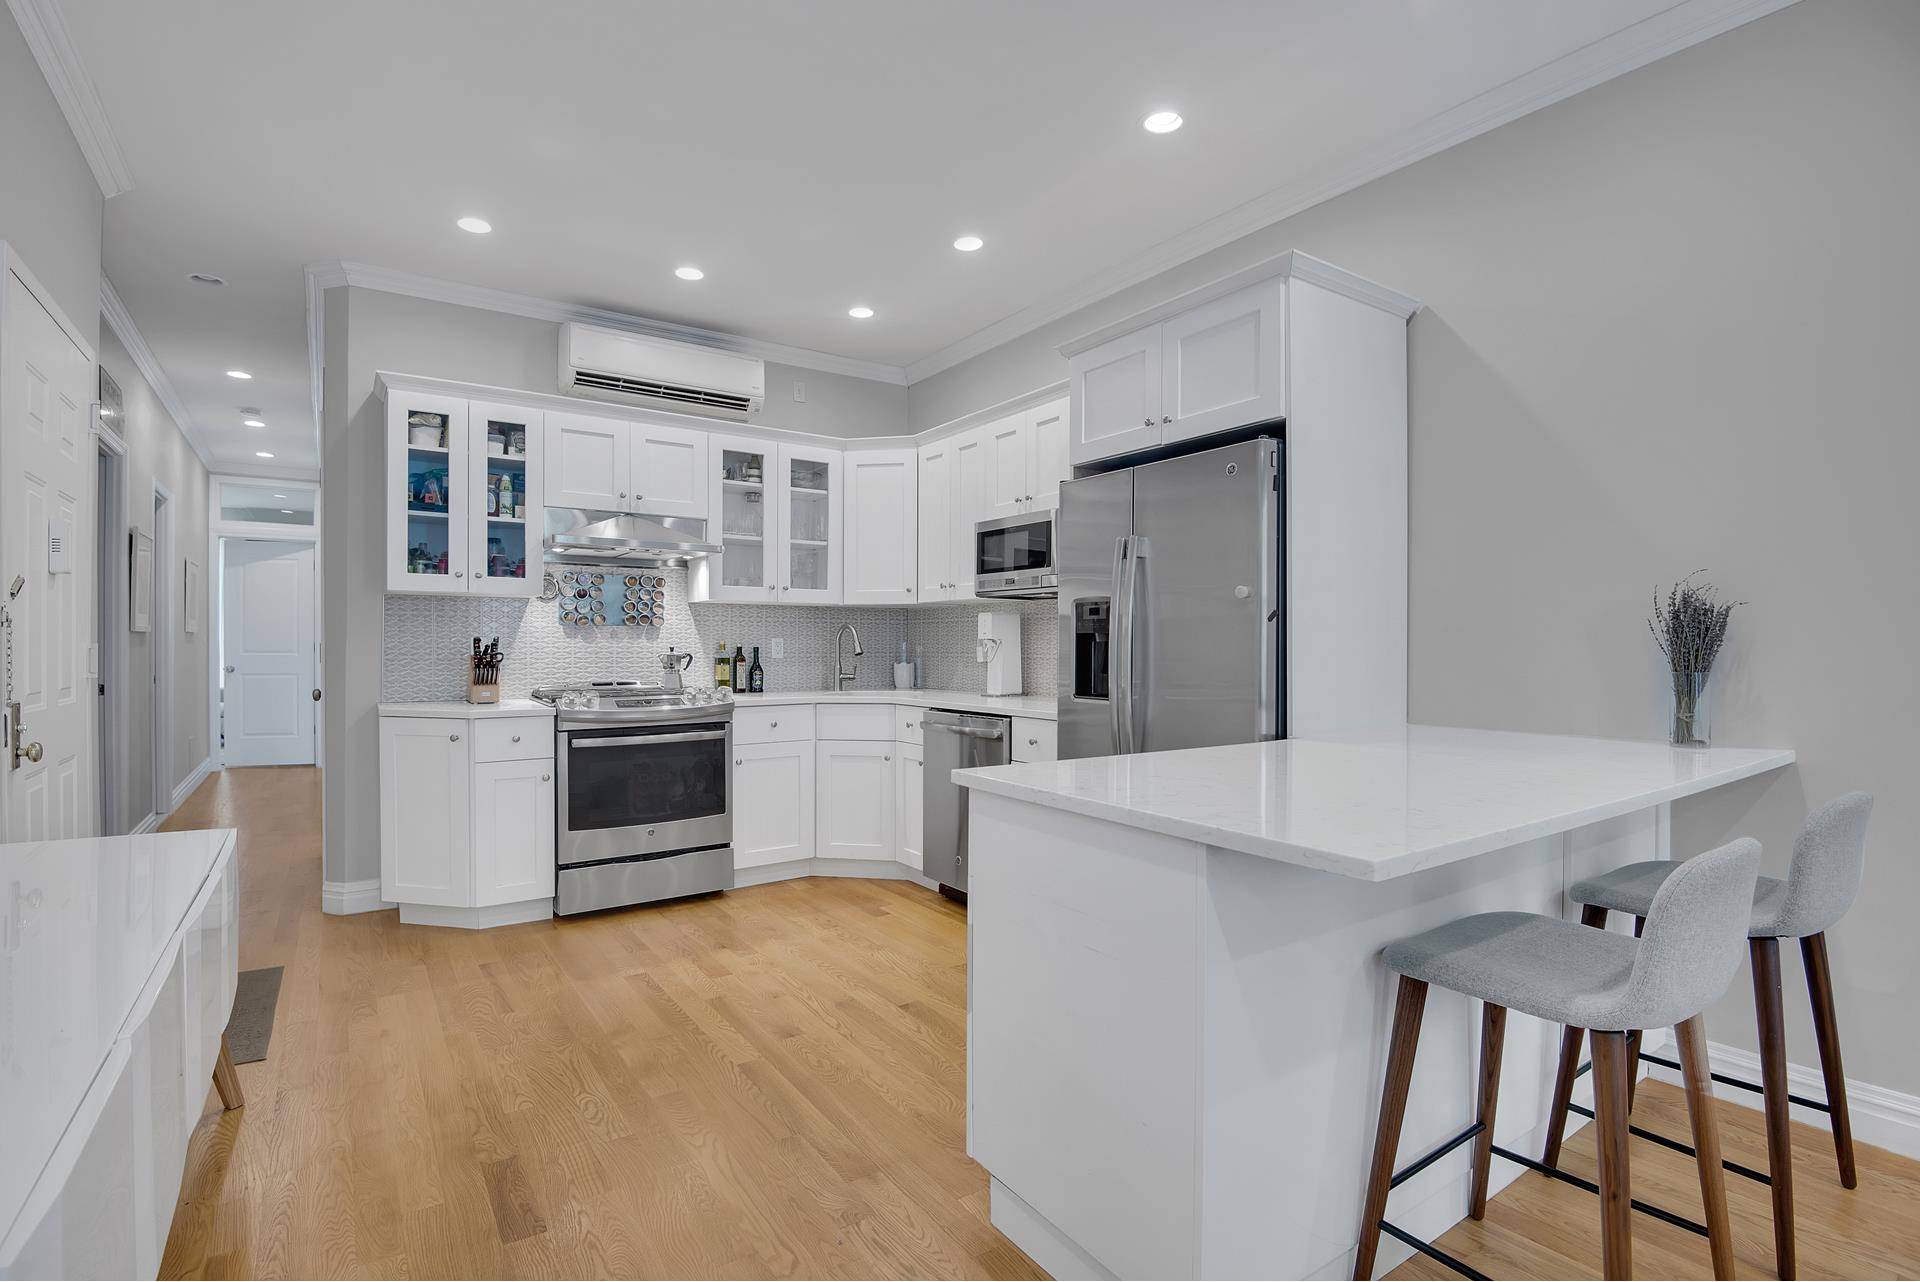 Luxury awaits you at this stunning 1, 200 square foot, 3 bedroom 2 bathroom renovated apartment, with low monthlies, in Park Slope, occupying the entire second floor of an intimate ...